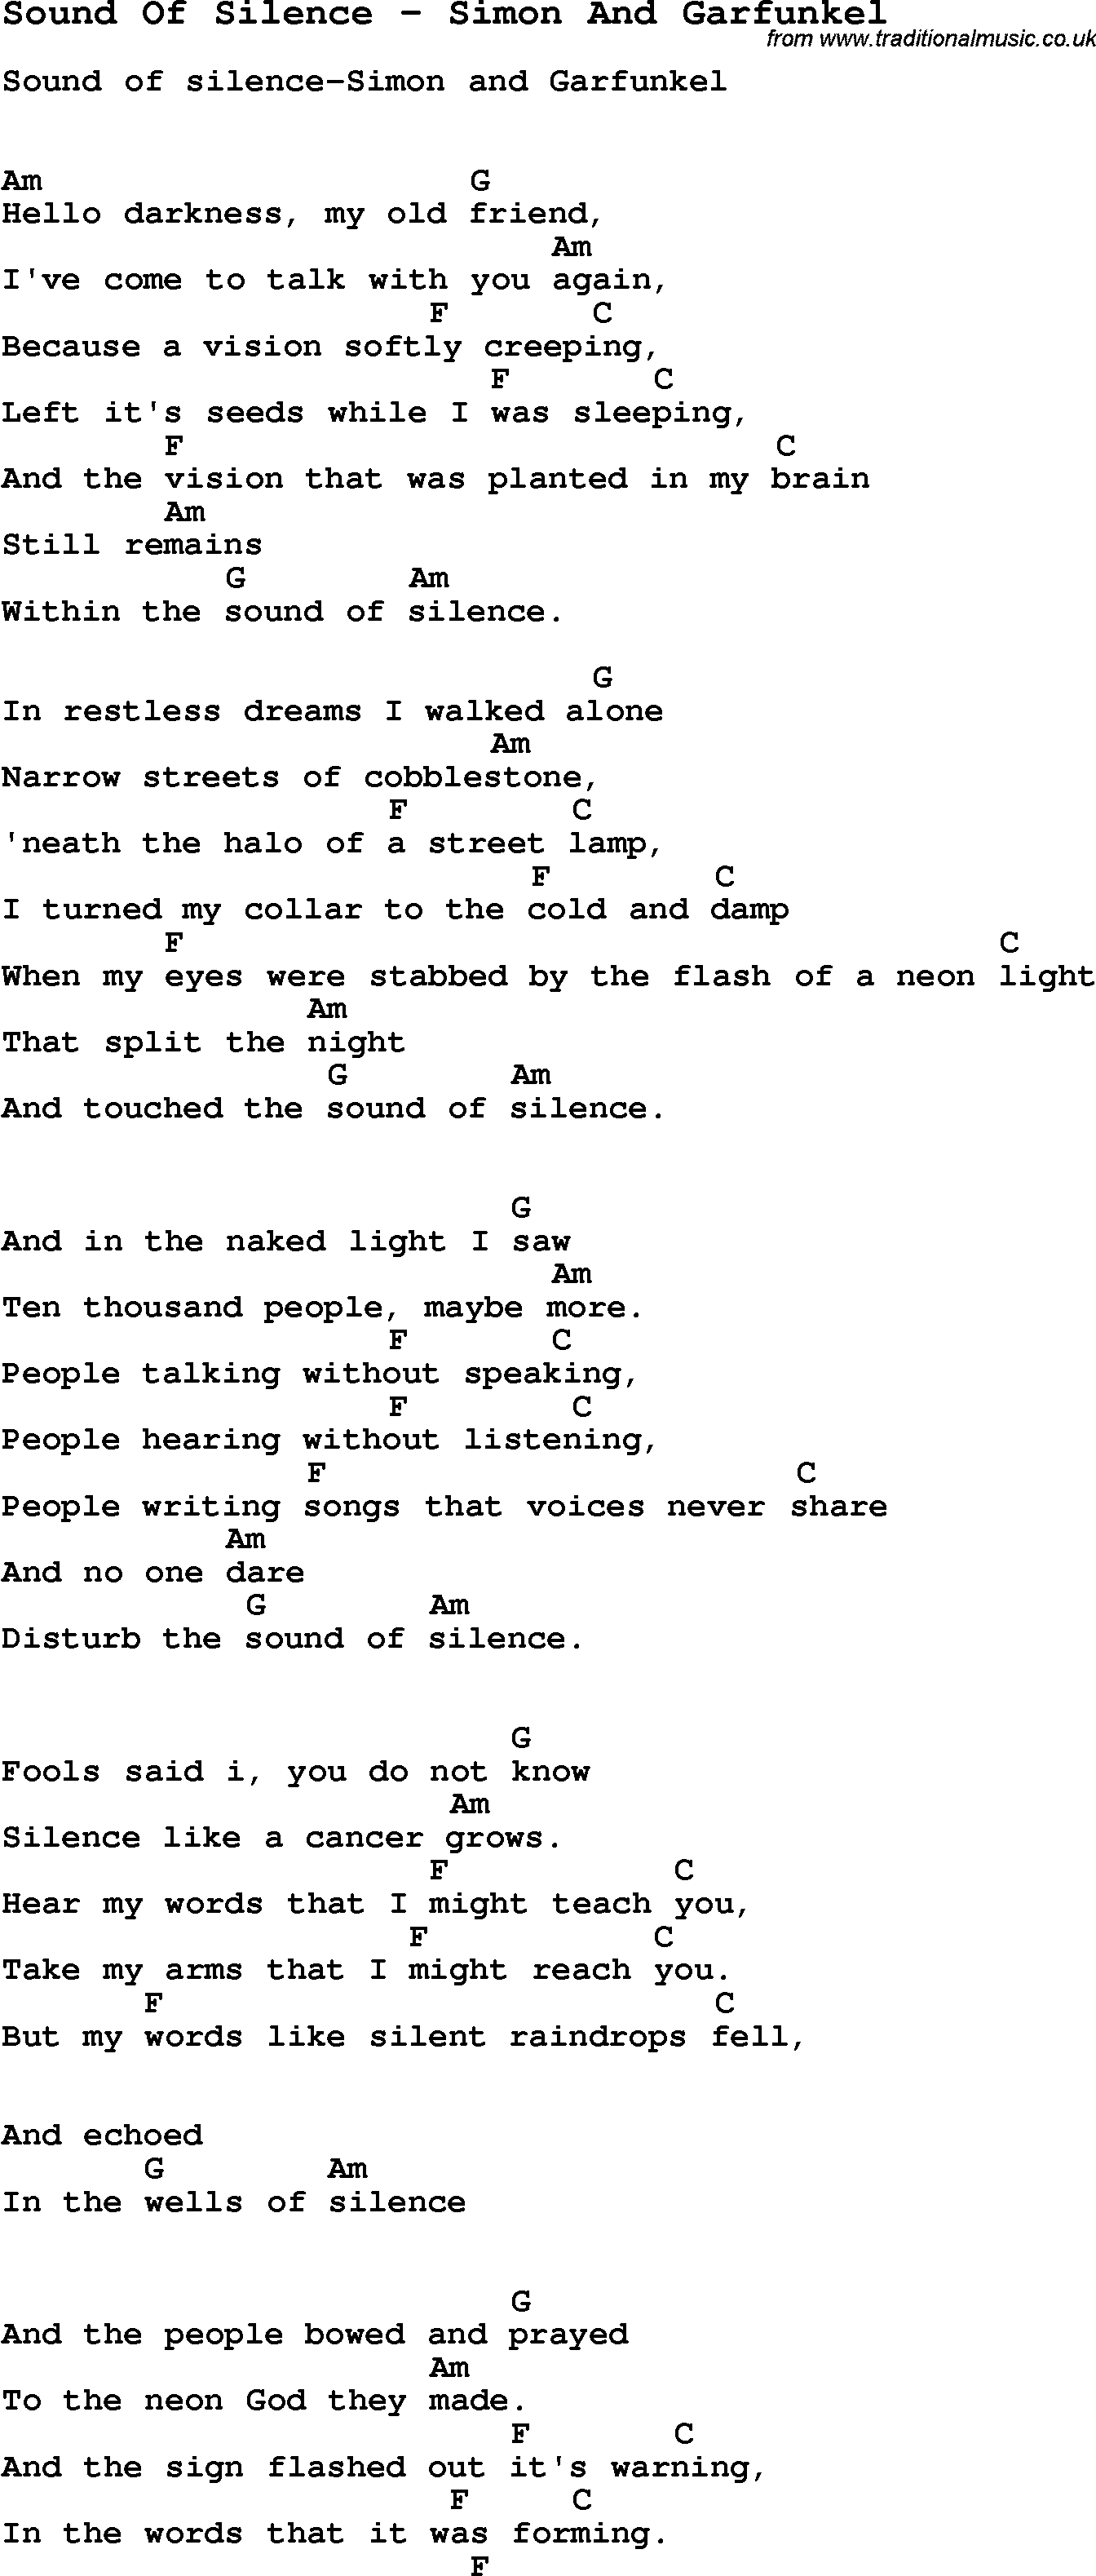 Sound Of Silence Chords Song Sound Of Silence Simon And Garfunkel Song Lyric For Vocal